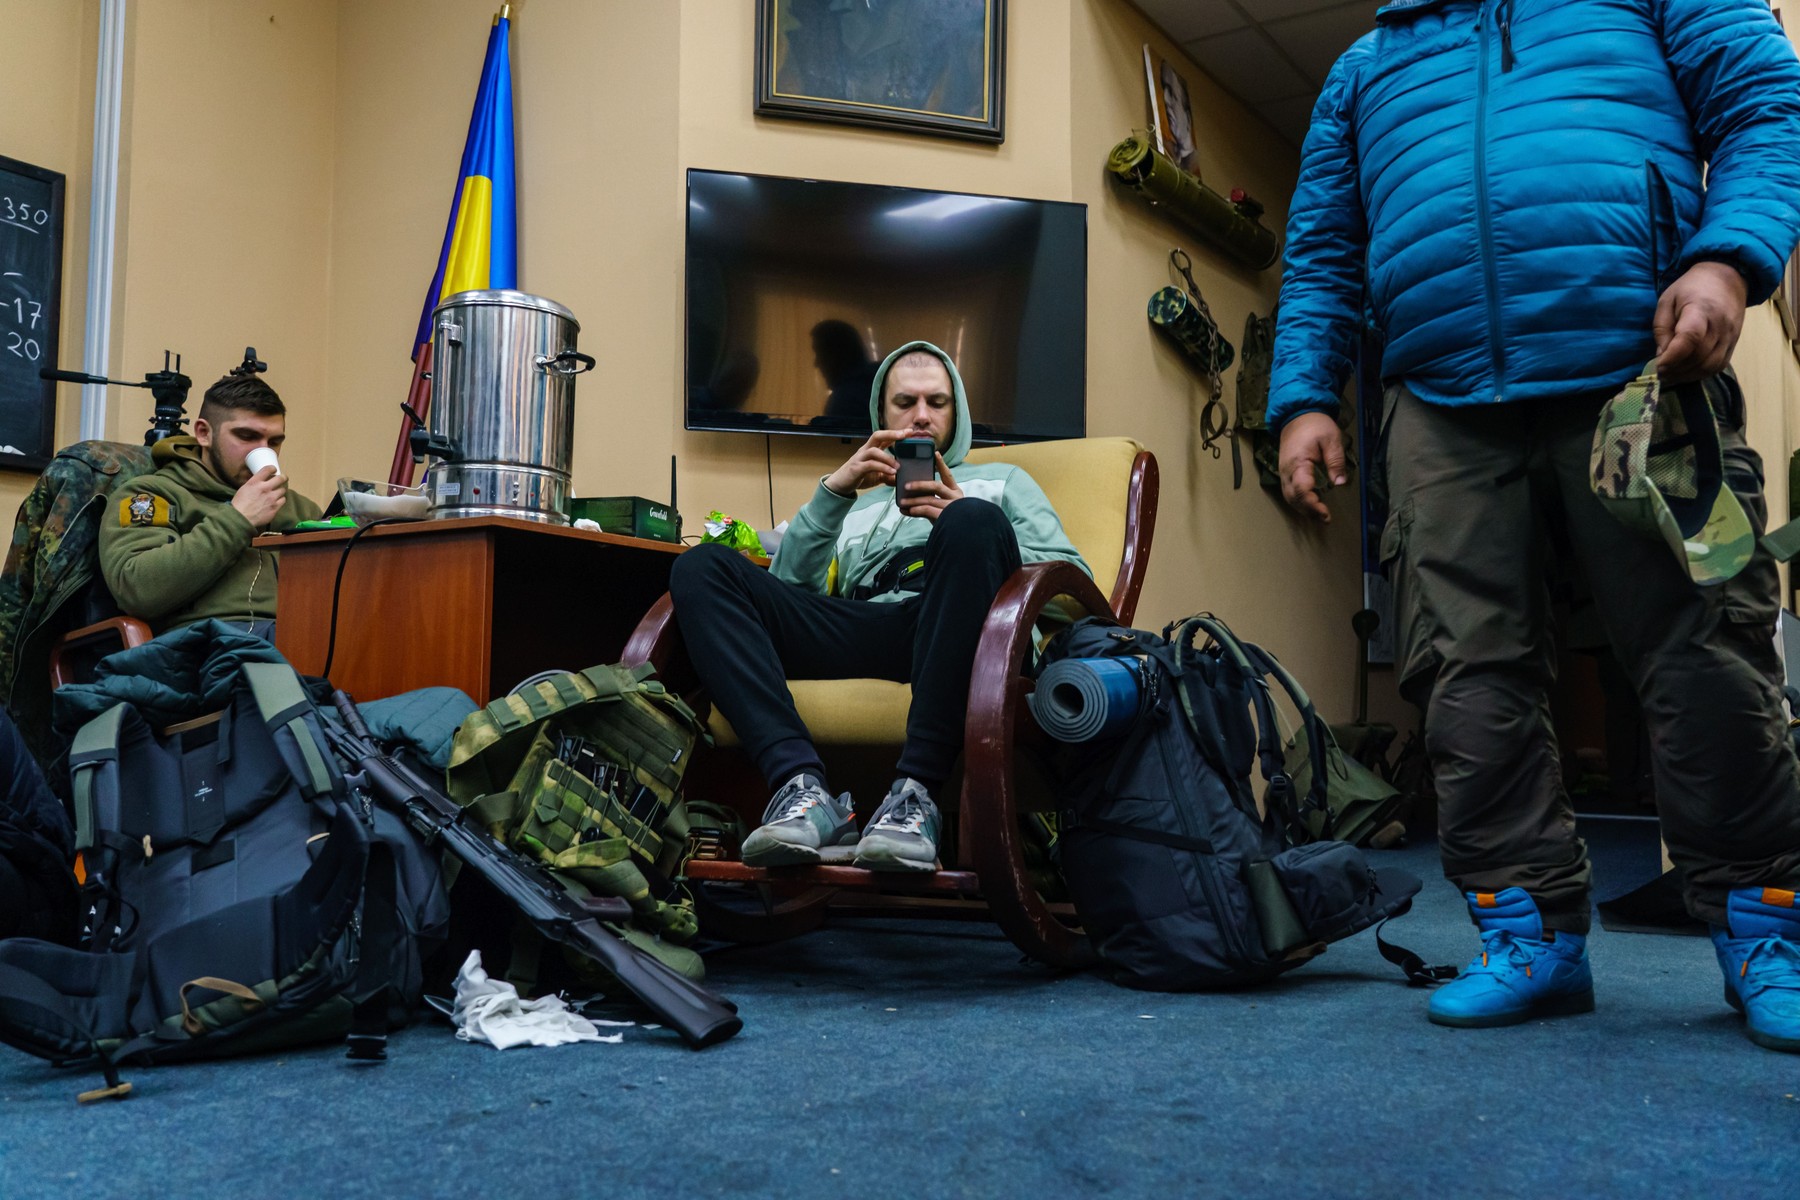 Volunteers from the Territorial Defense Units gather in an outpost to collect weapons, train and get their assignments in Kyiv, Ukraine, Saturday, Feb. 26, 2022. (MARCUS YAM / LOS ANGELES TIMES)
UKRAINE RUSSIA CRISIS, Kyiv, Kyiv Oblast, Ukraine - 26 Feb 2022,Image: 665267591, License: Rights-managed, Restrictions: , Model Release: no, Credit line: Profimedia